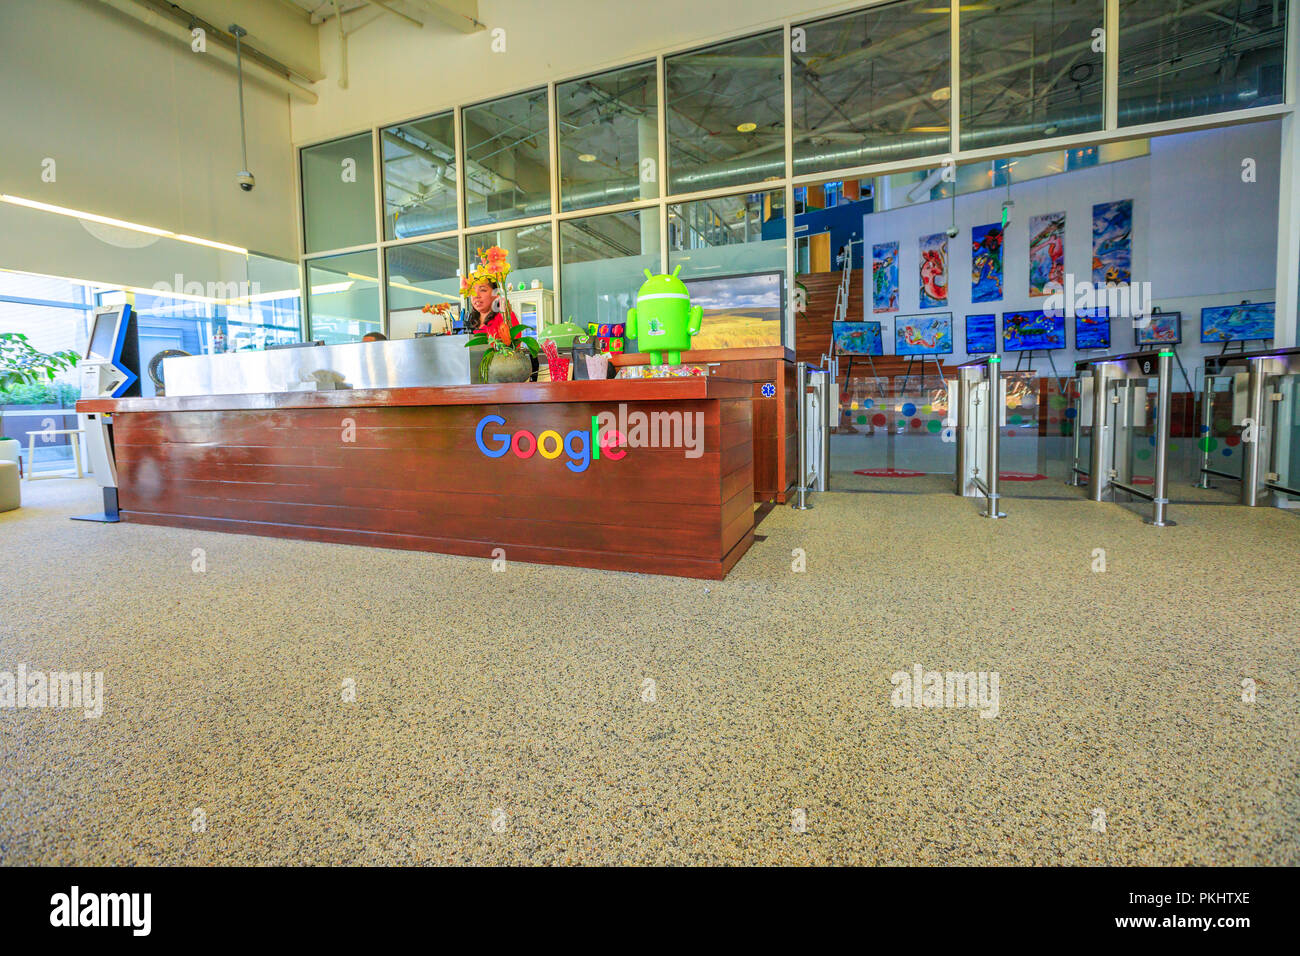 Mountain View, California, USA - August 13, 2018: interior of Google campus headquarters. Google technology company leader in internet services, online advertising, search engine, cloud computing. Stock Photo